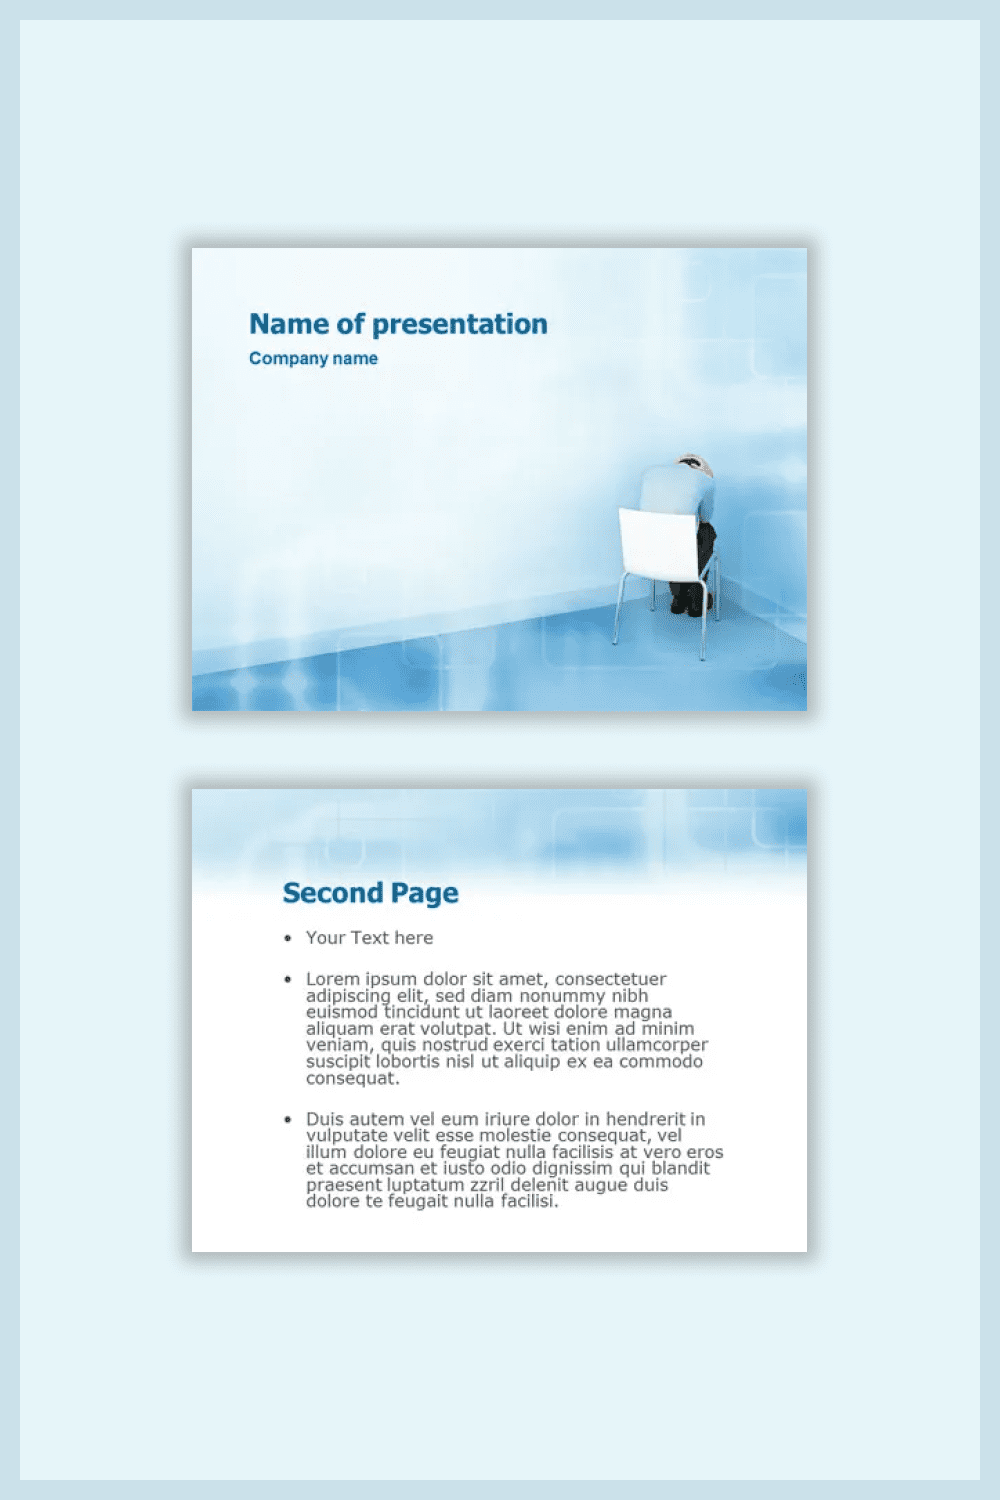 Collage of presentation pages with a photo of a person on a chair in the corner.